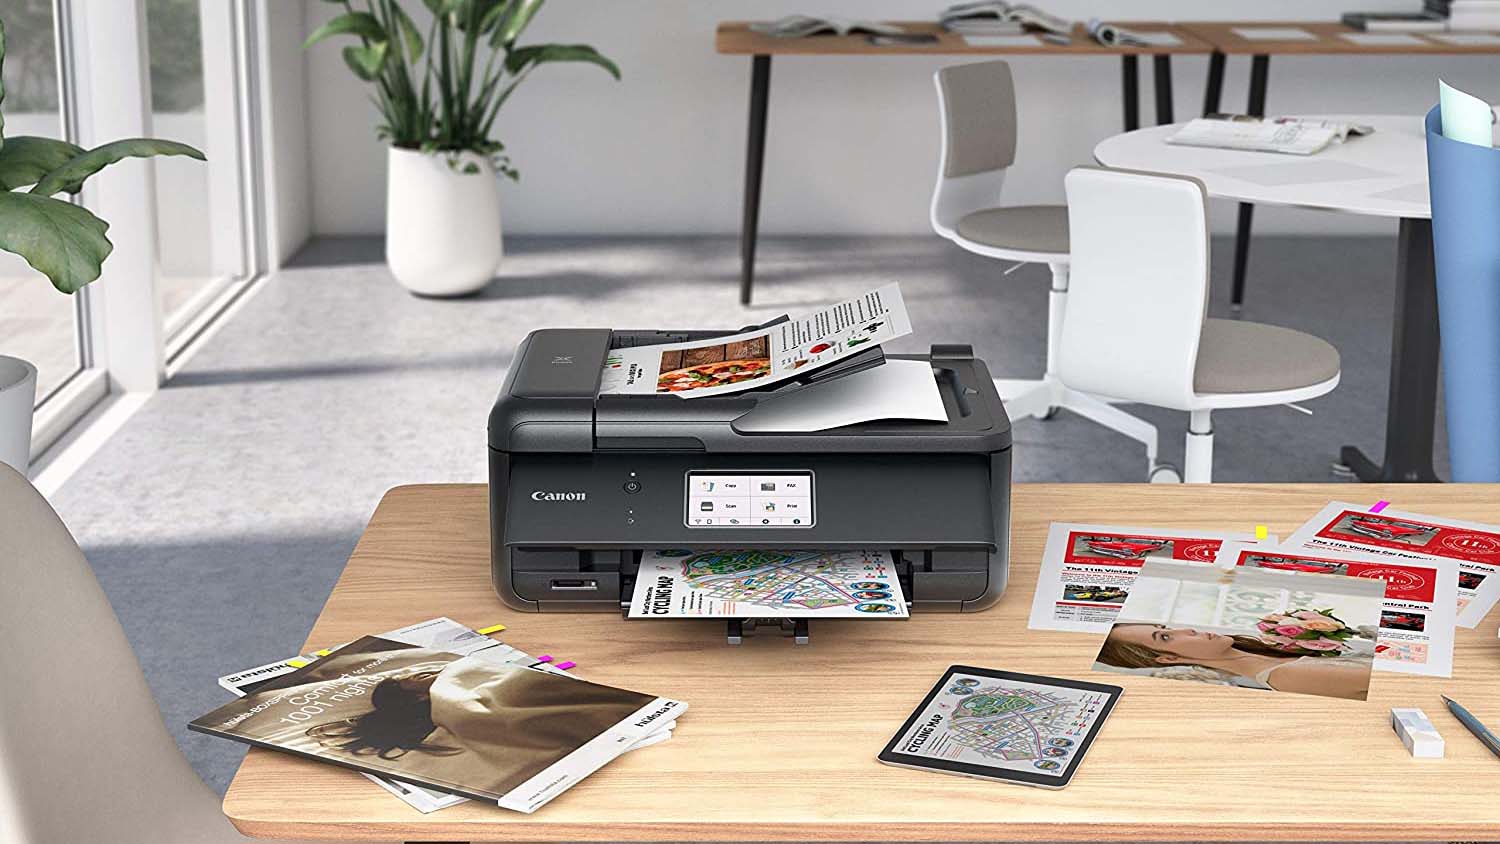 and Android Printing Photo and Document Printing Black Airprint Copier |Scanner| Fax |Auto Document Feeder Canon TR8620 All-in-One Printer for Home Office R